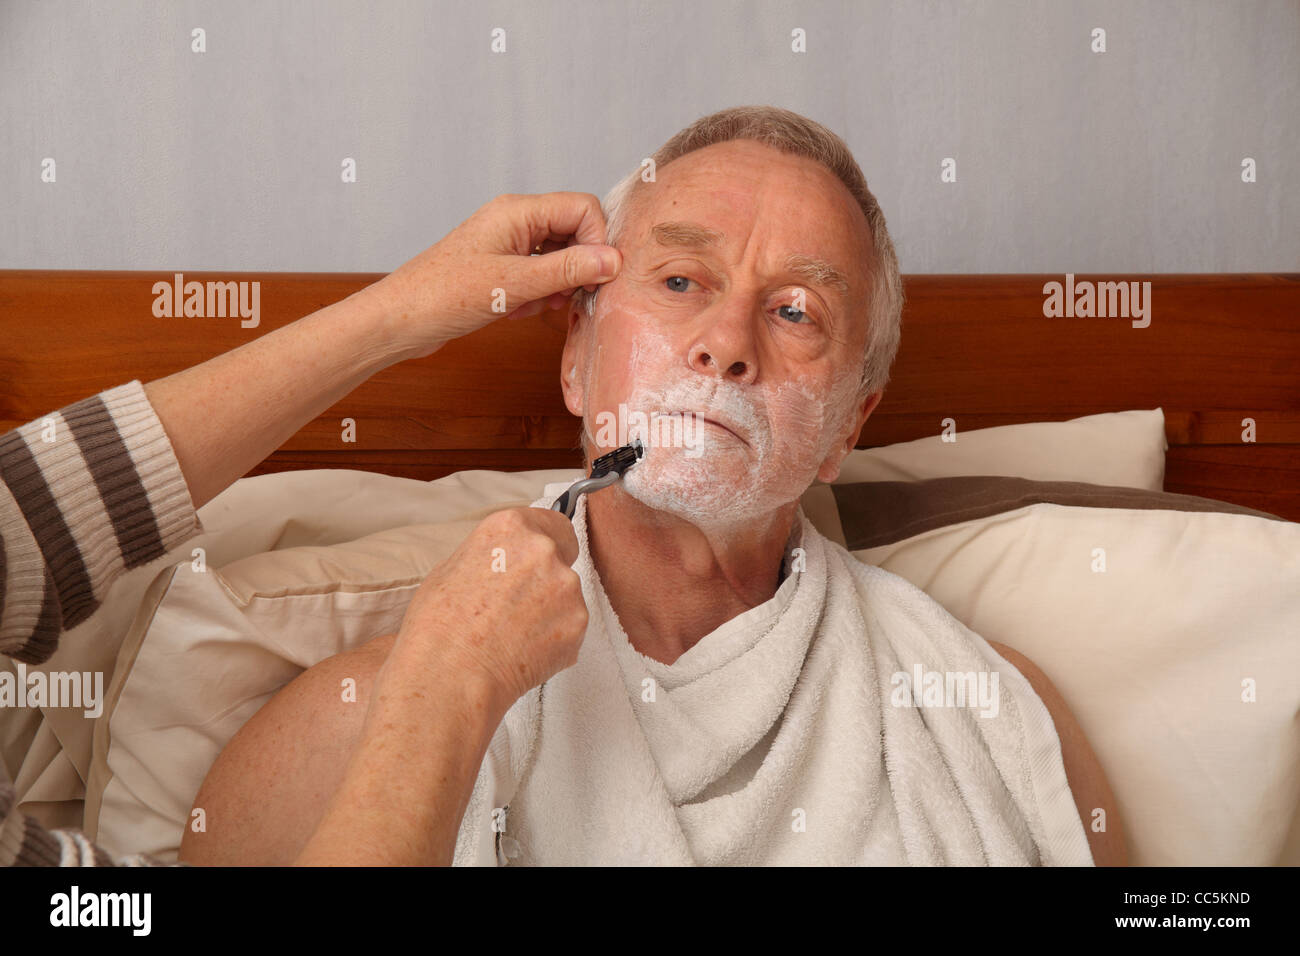 A bedbound man in his 60's being shaved by his wife/carer Stock Photo